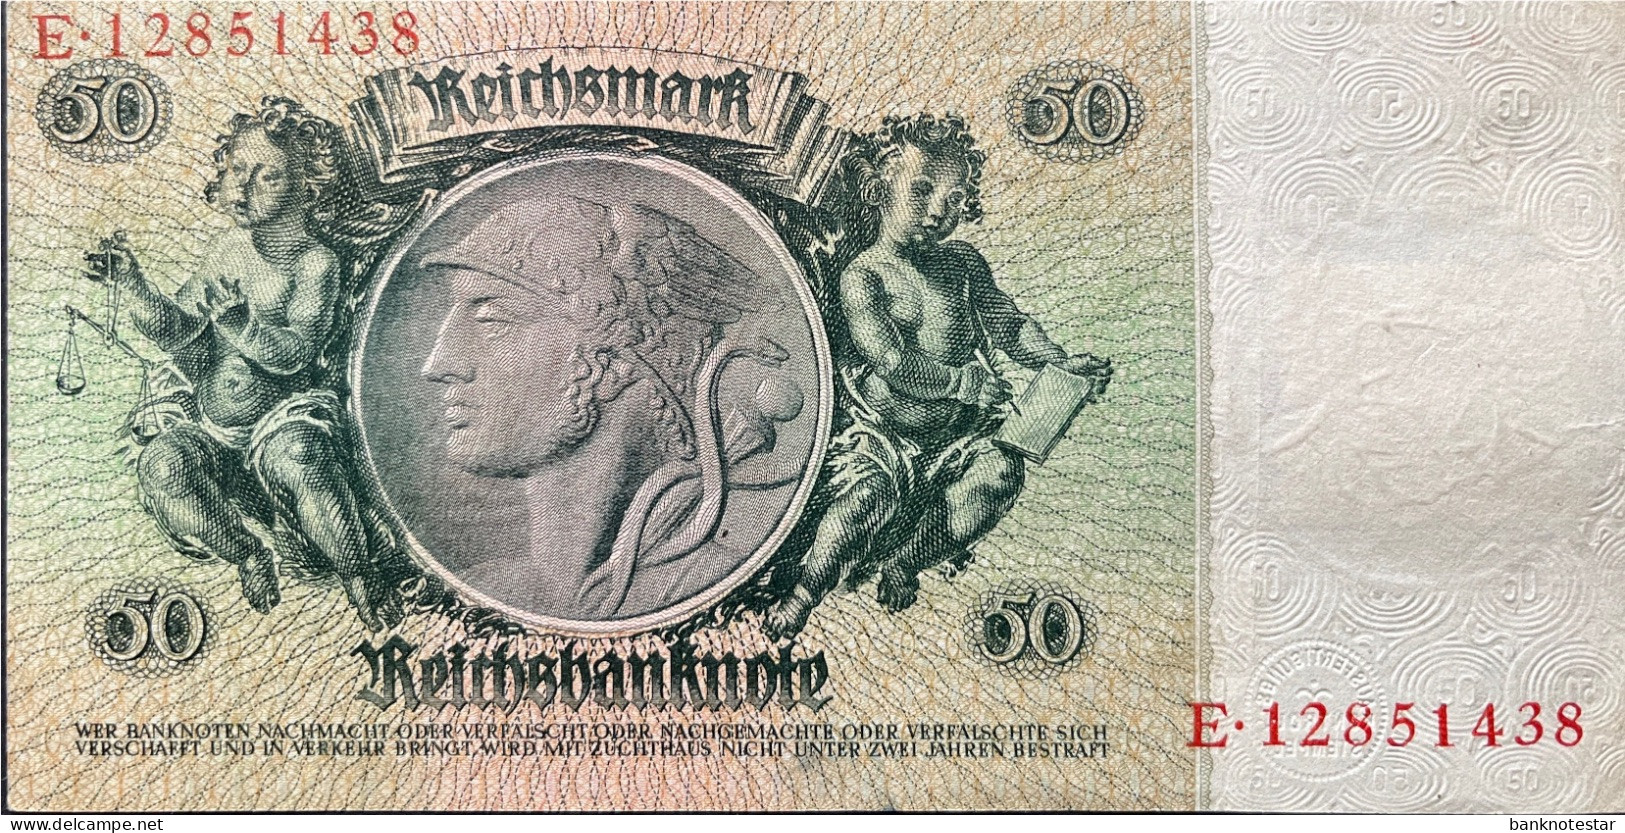 Germany East 50 Mark, P-6b (1948) - Extremely Fine - 50 Deutsche Mark